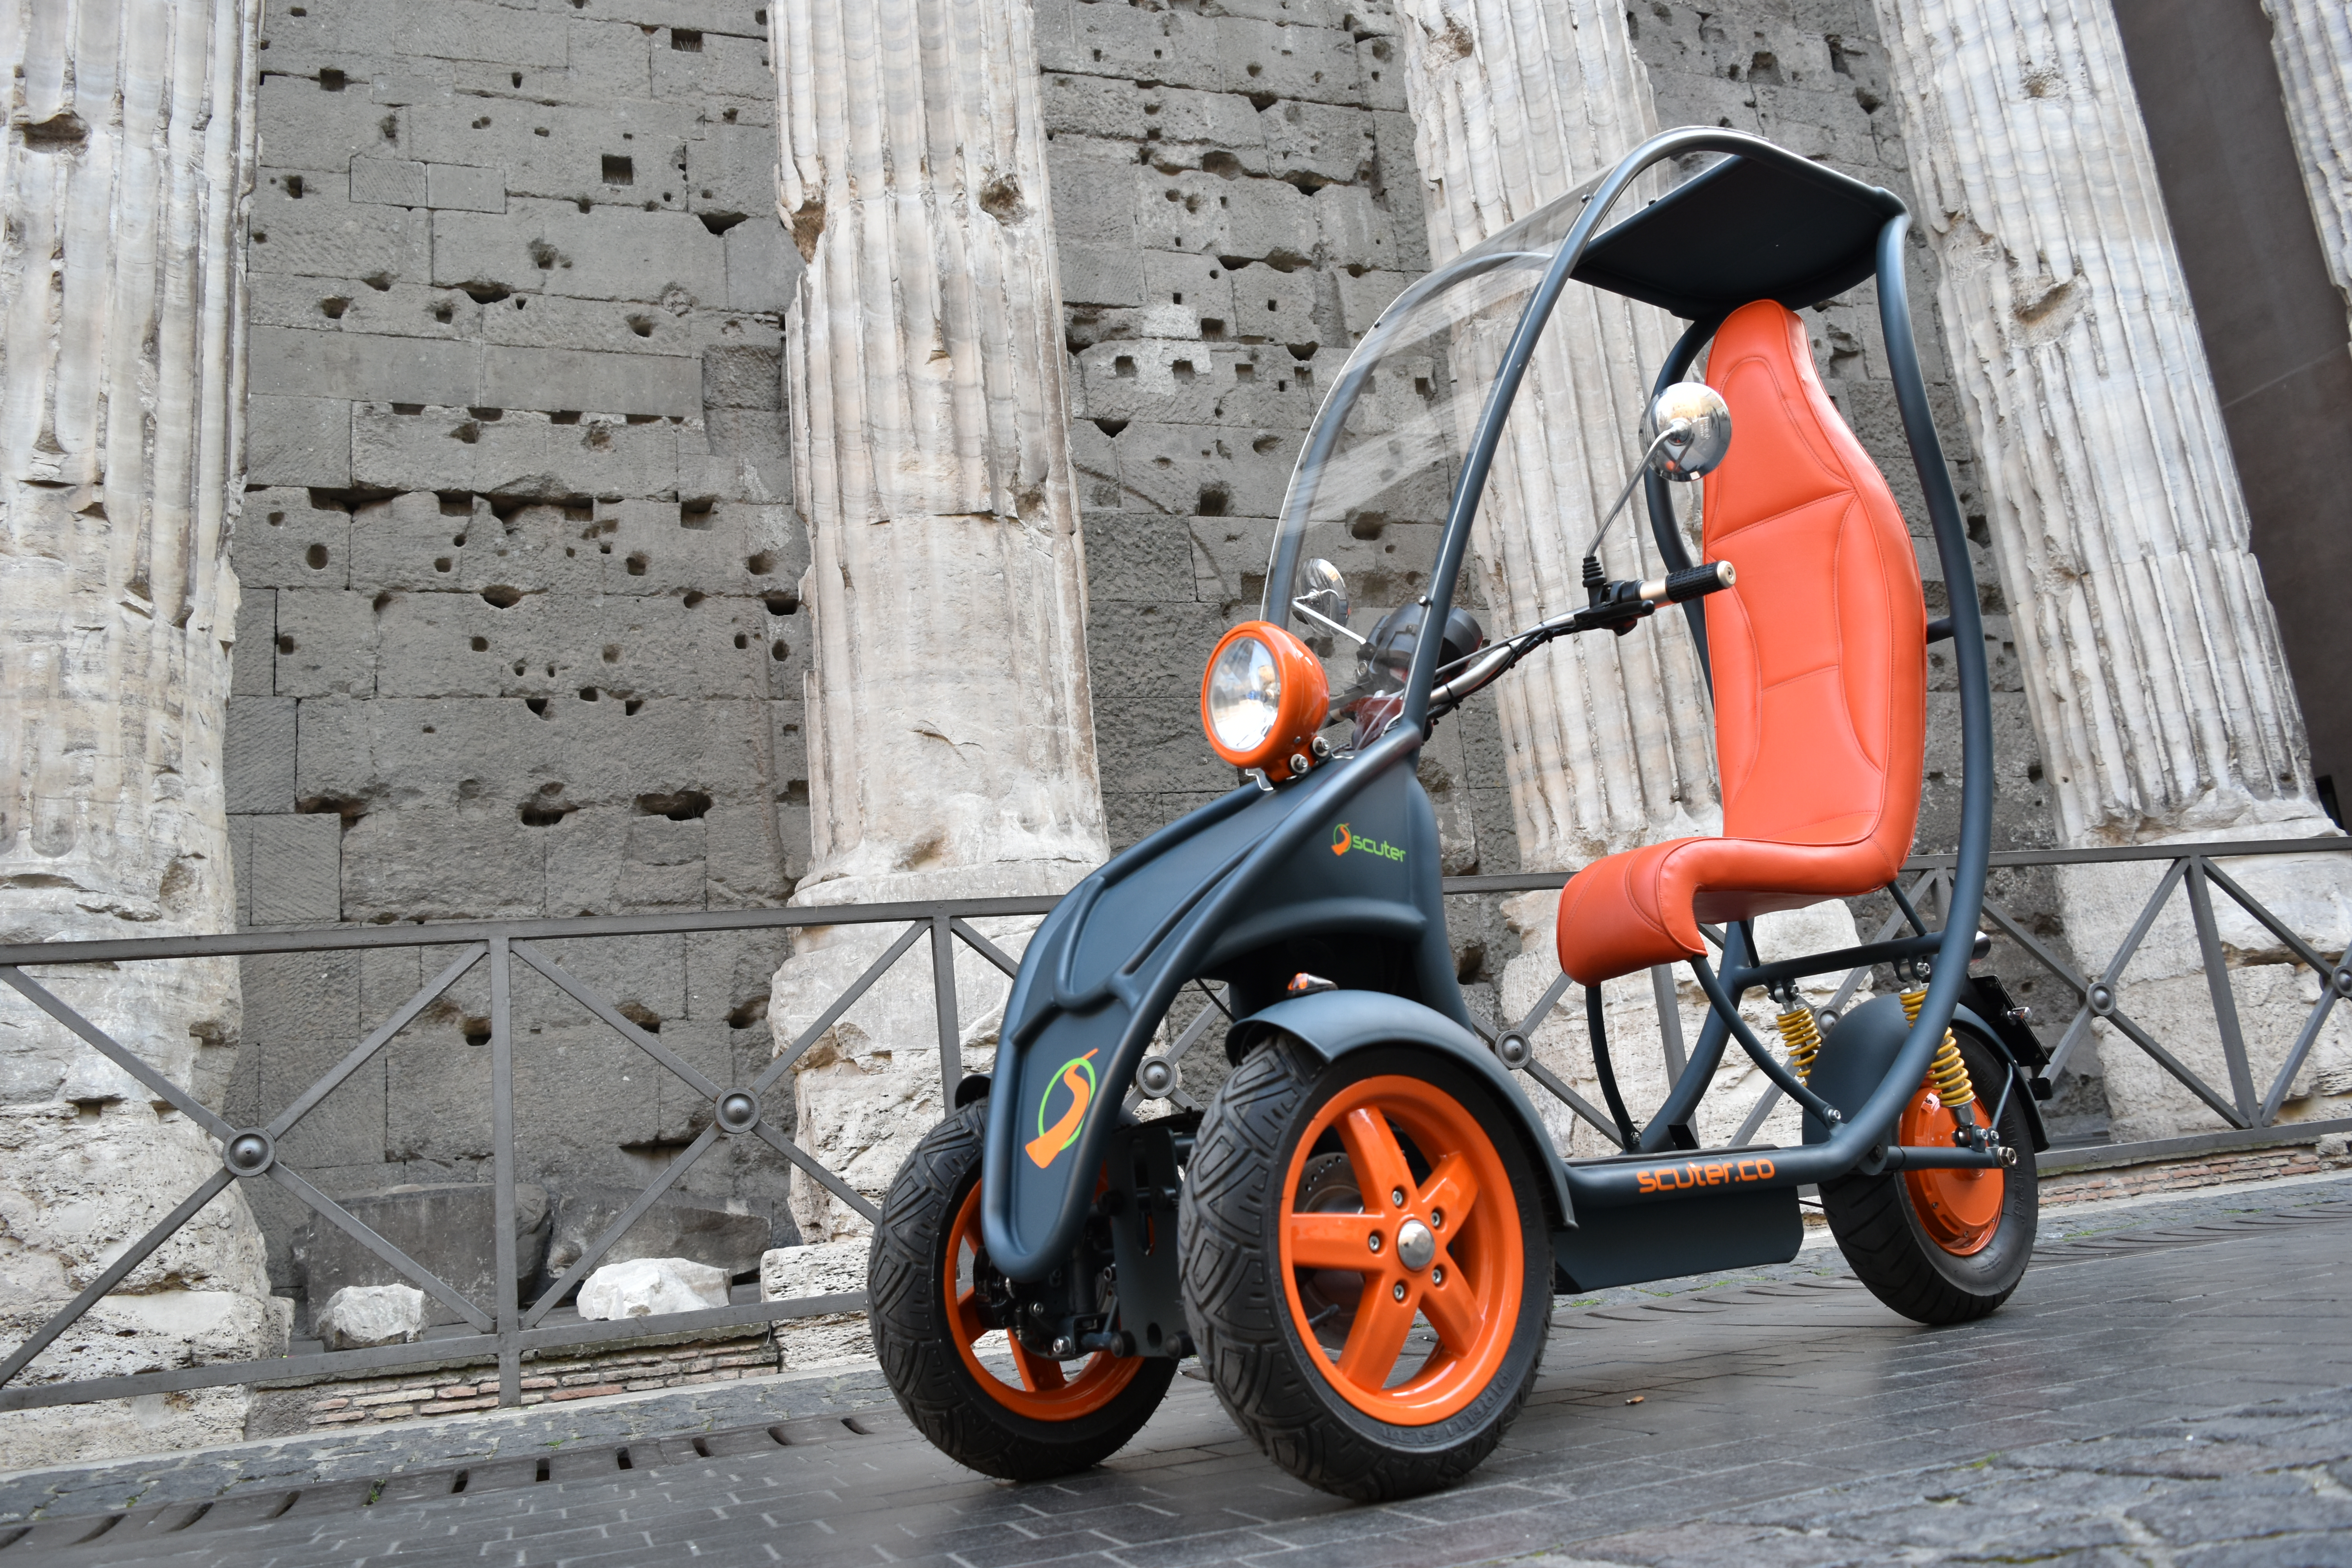 Scuter, the smart e-scooter sharing service that revolutions the urban commuting